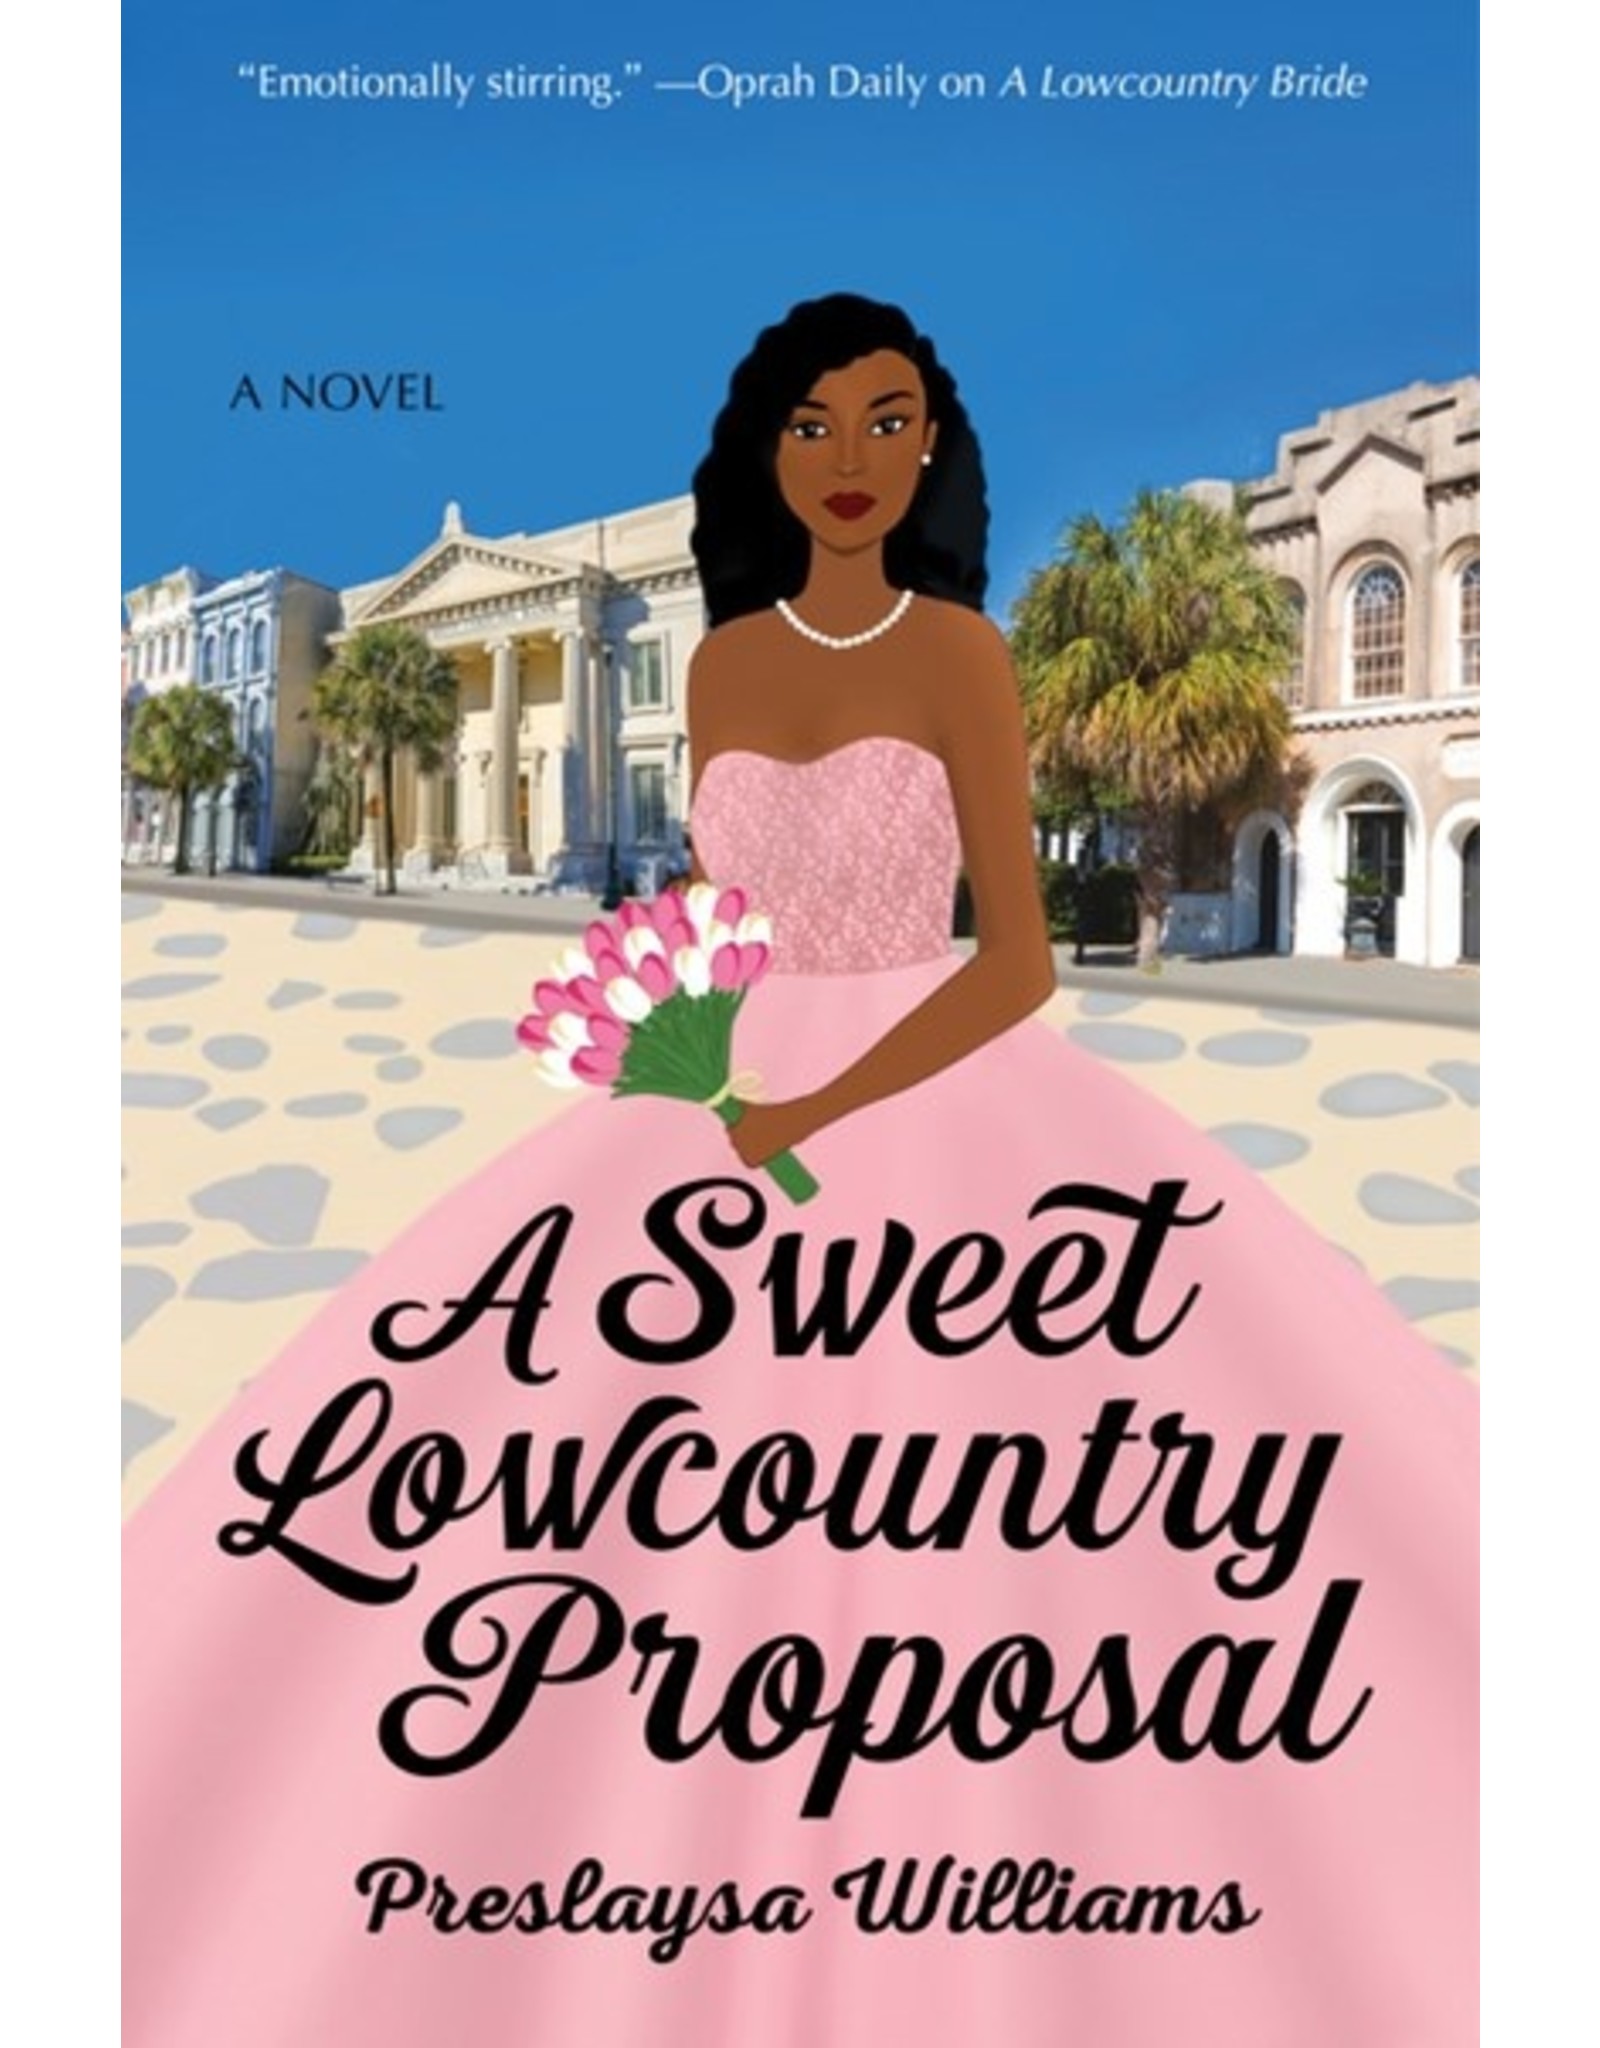 Books A Sweet Lowcountry Proposal by Preslaysa Williams